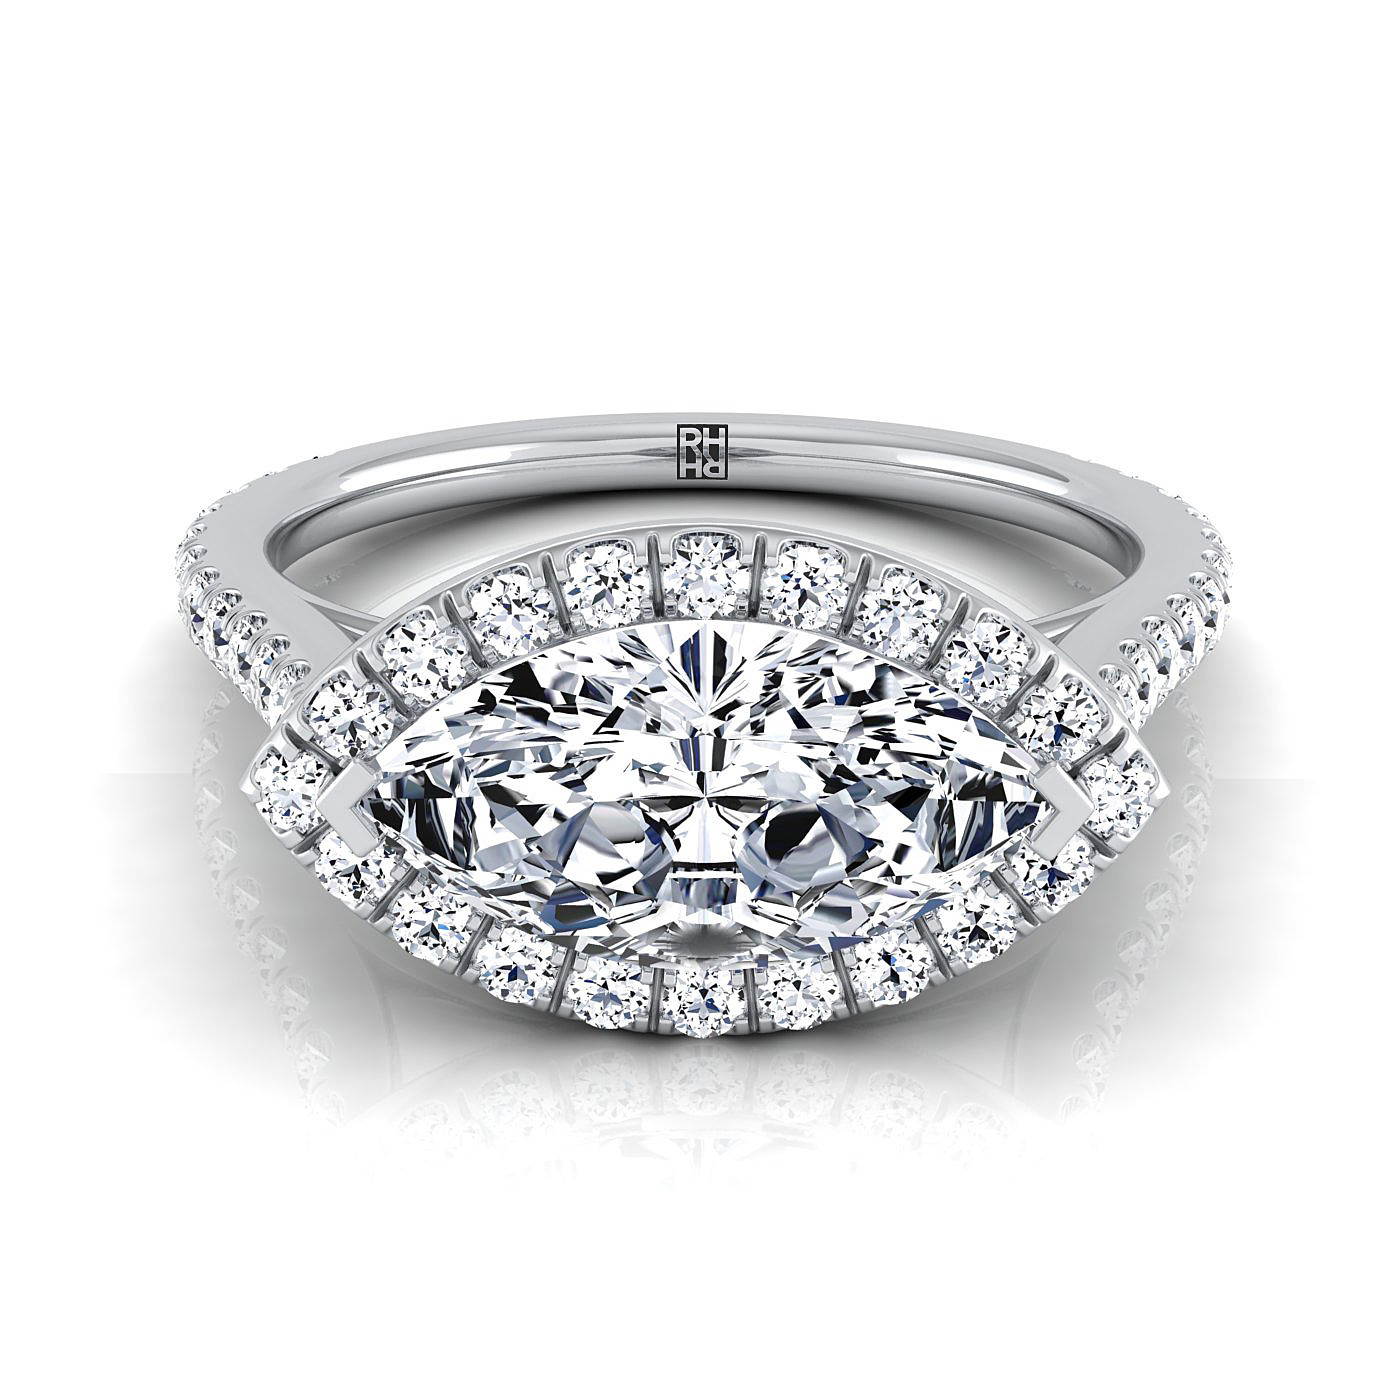 Marquise Diamond Engagement Ring
 East West Marquise Cut Diamond Halo Engagement Ring In 14k